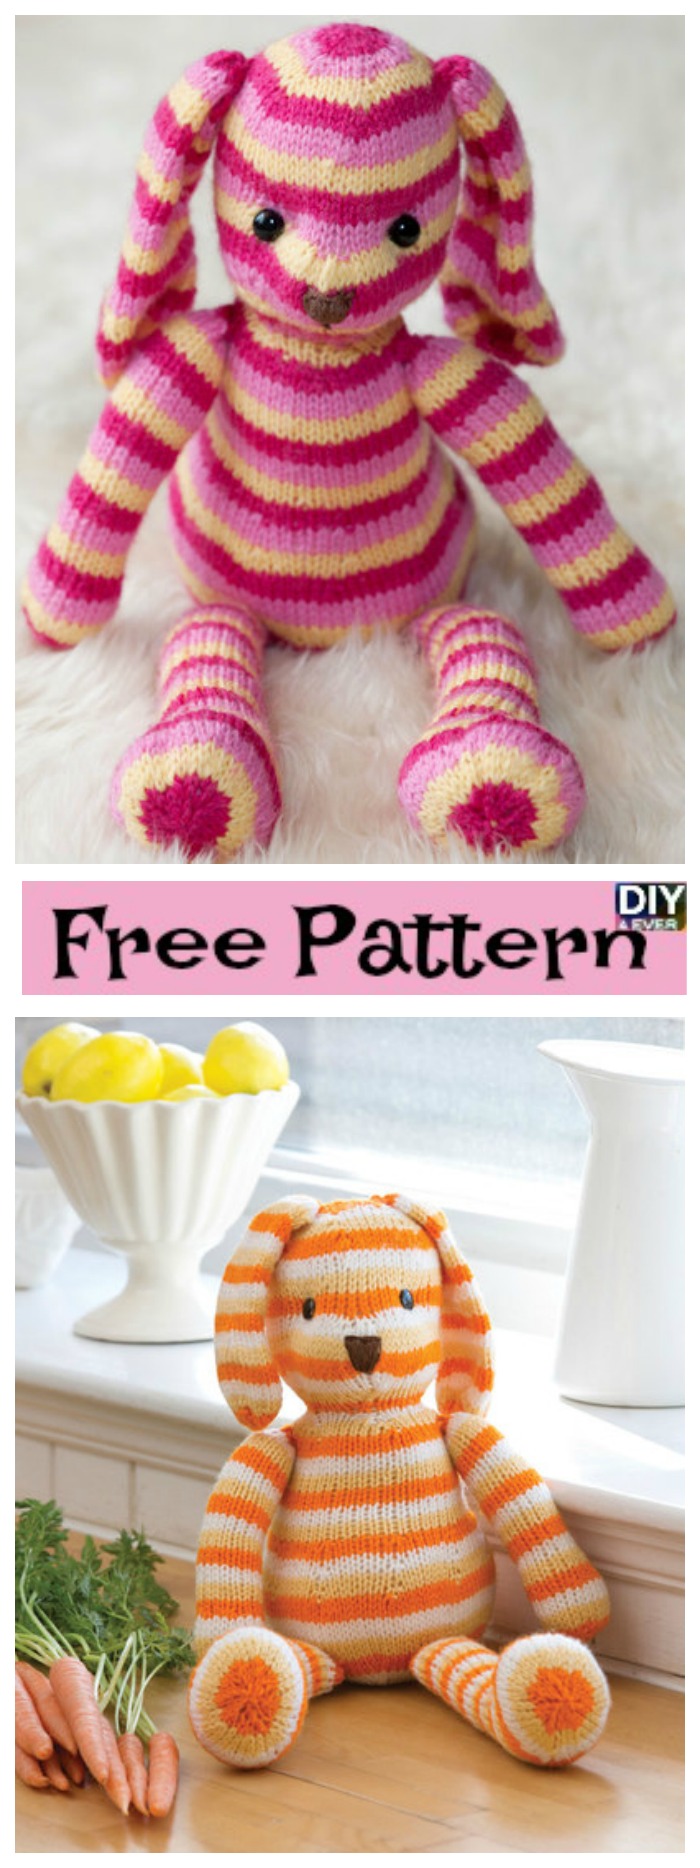 diy4ever- Adorable Striped Knit Bunny - Free Pattern